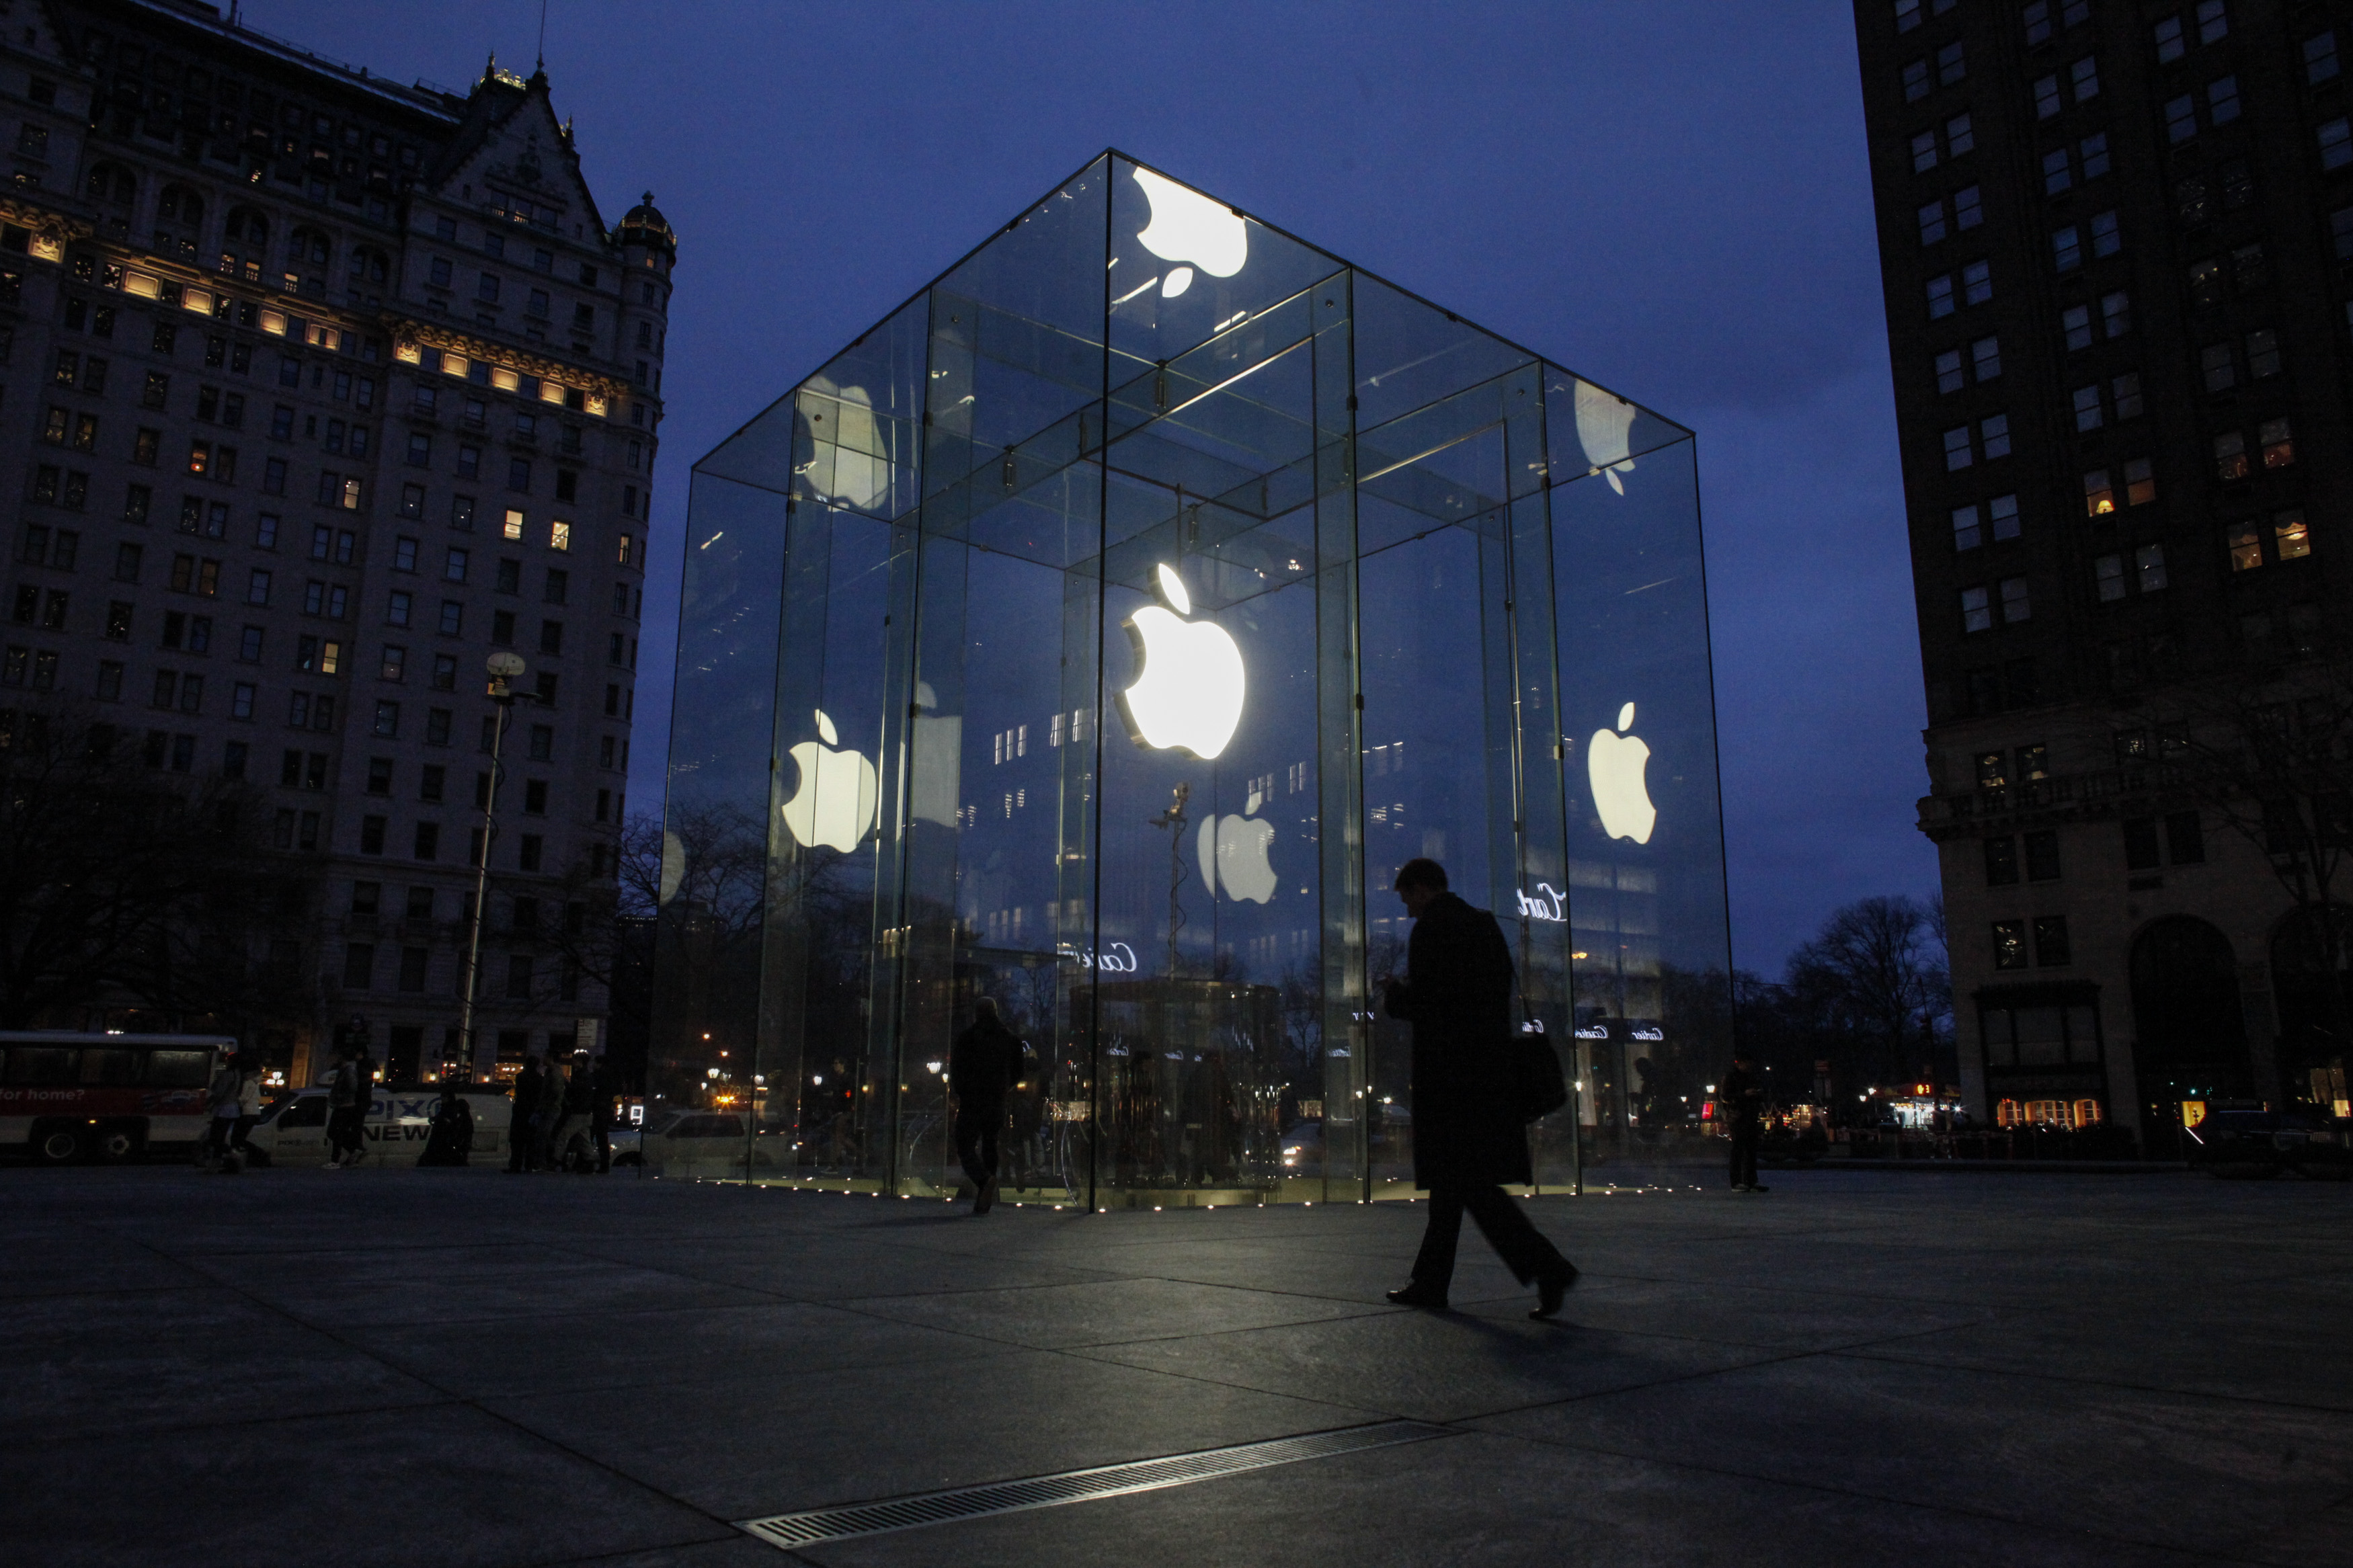 A man walks outside the Apple store on the Fifth Avenue in New York City on Feb. 17, 2016 (Kena Betancur—AFP/Getty Images)